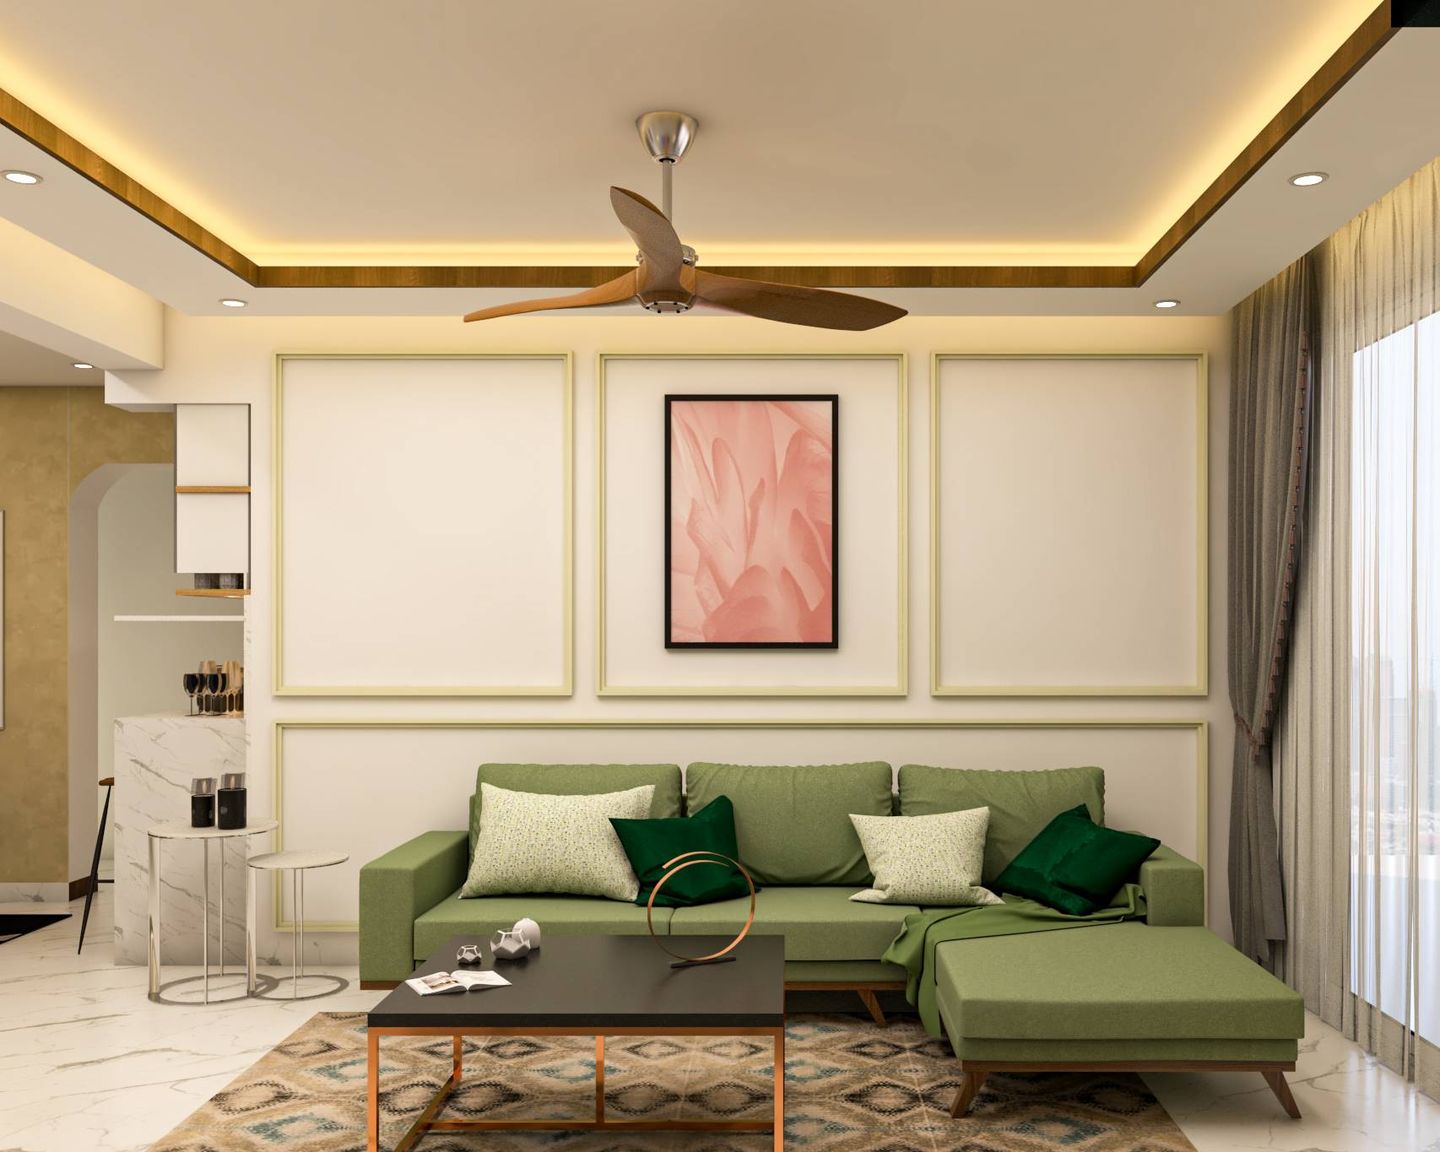 False ceiling with warm lighting and matching wall trims - Livspace